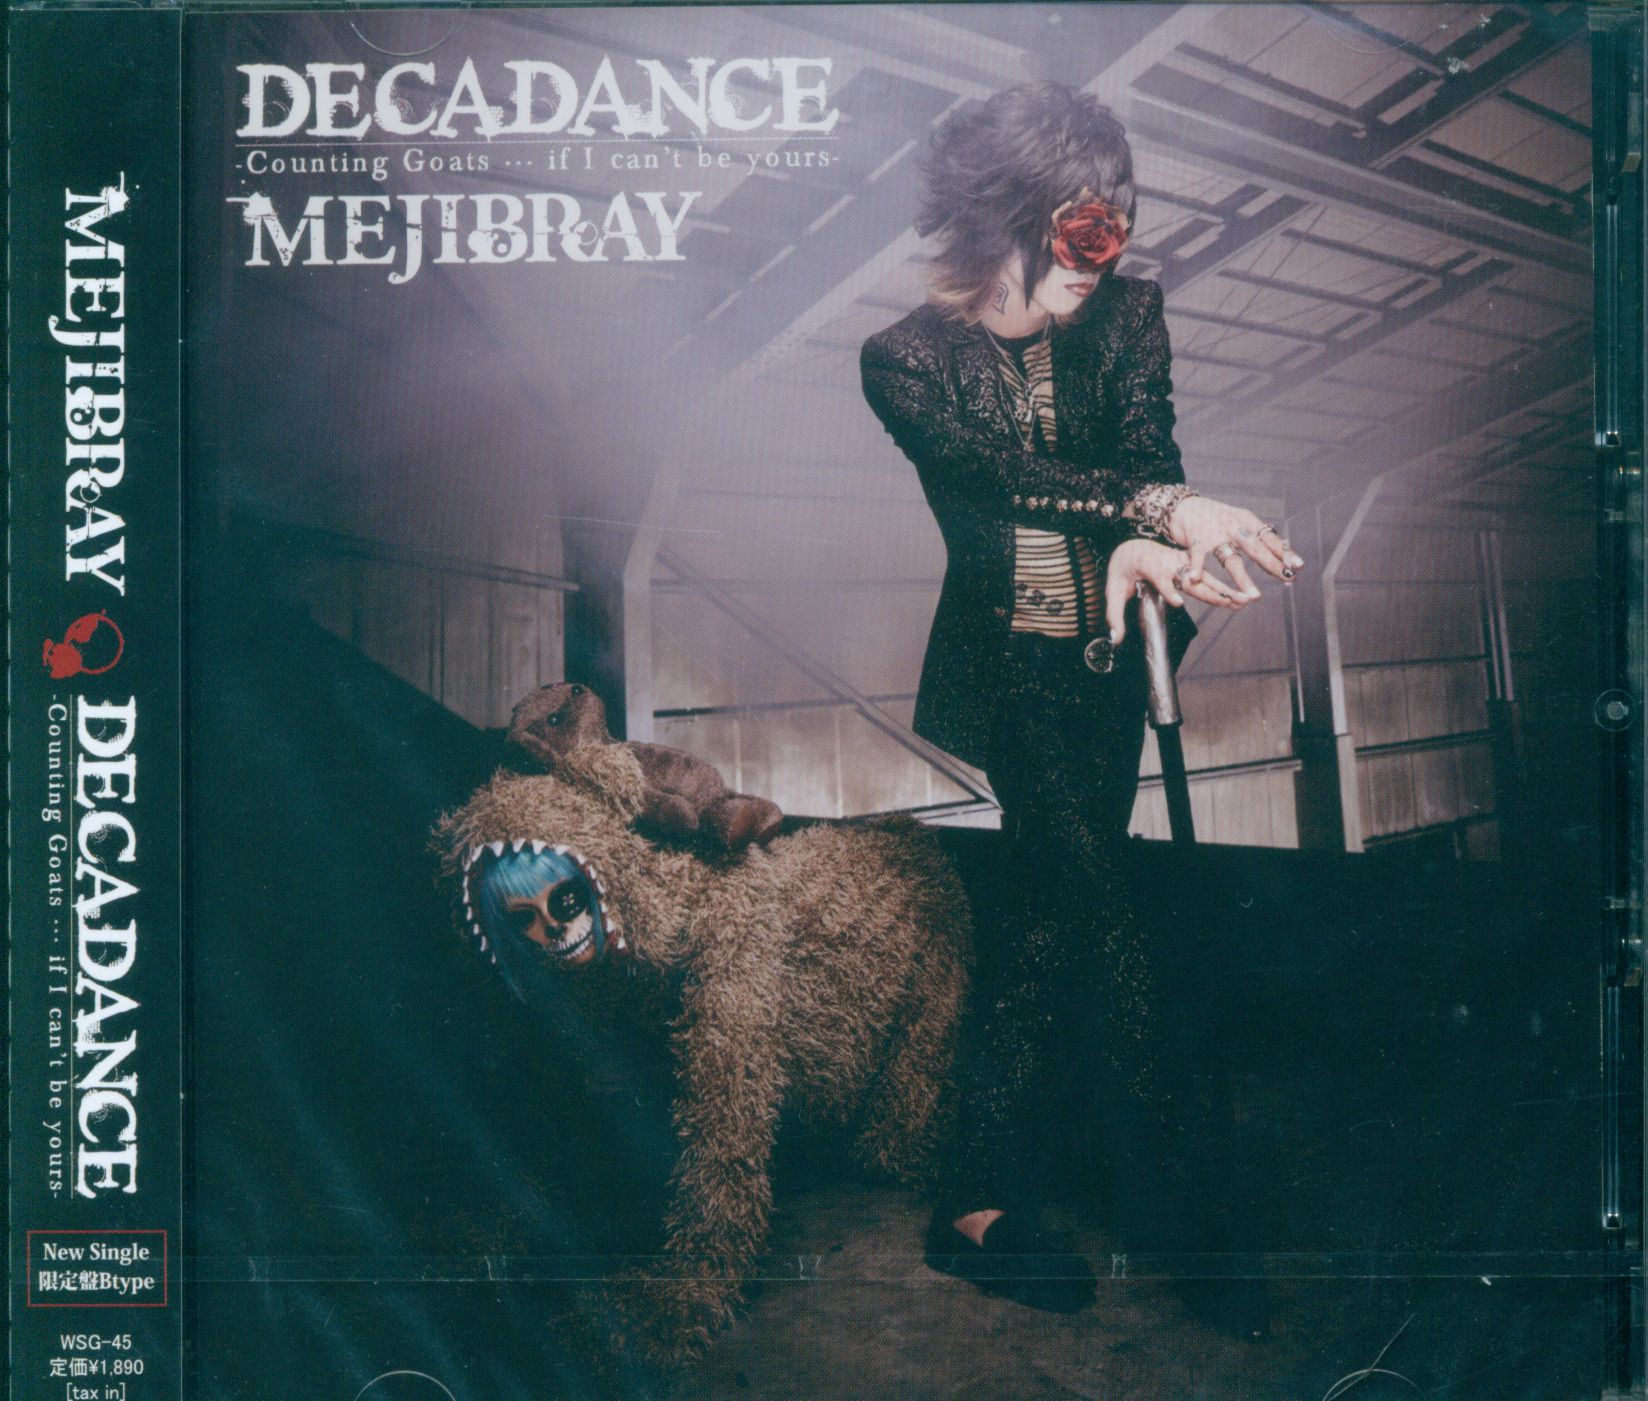 MEJIBRAY 初回盤B(CD+DVD) DECADANCE Counting Goats if I can t be ...